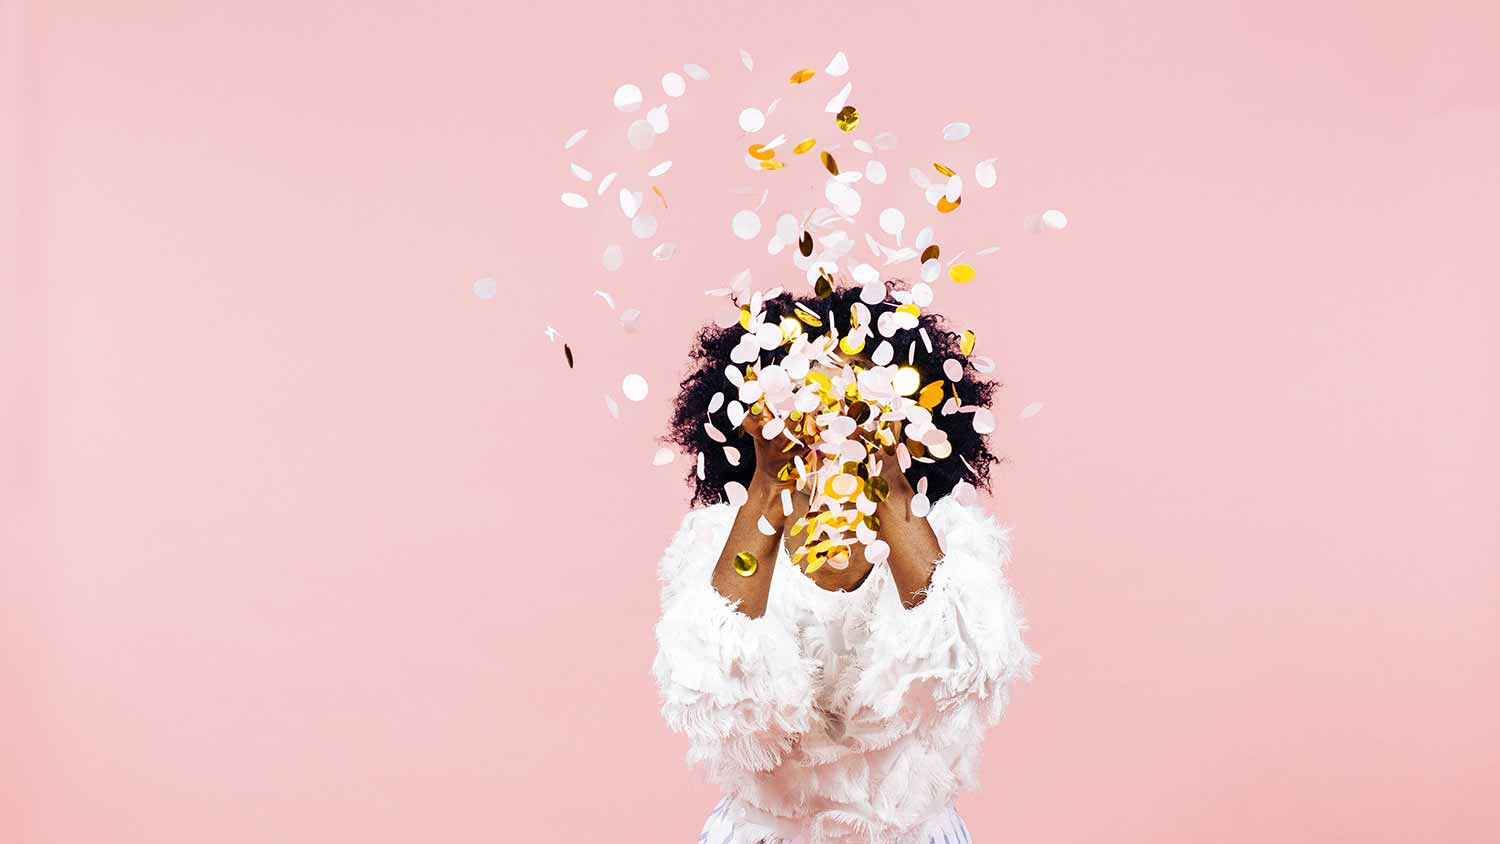 How to Clean Up Confetti & Glitter